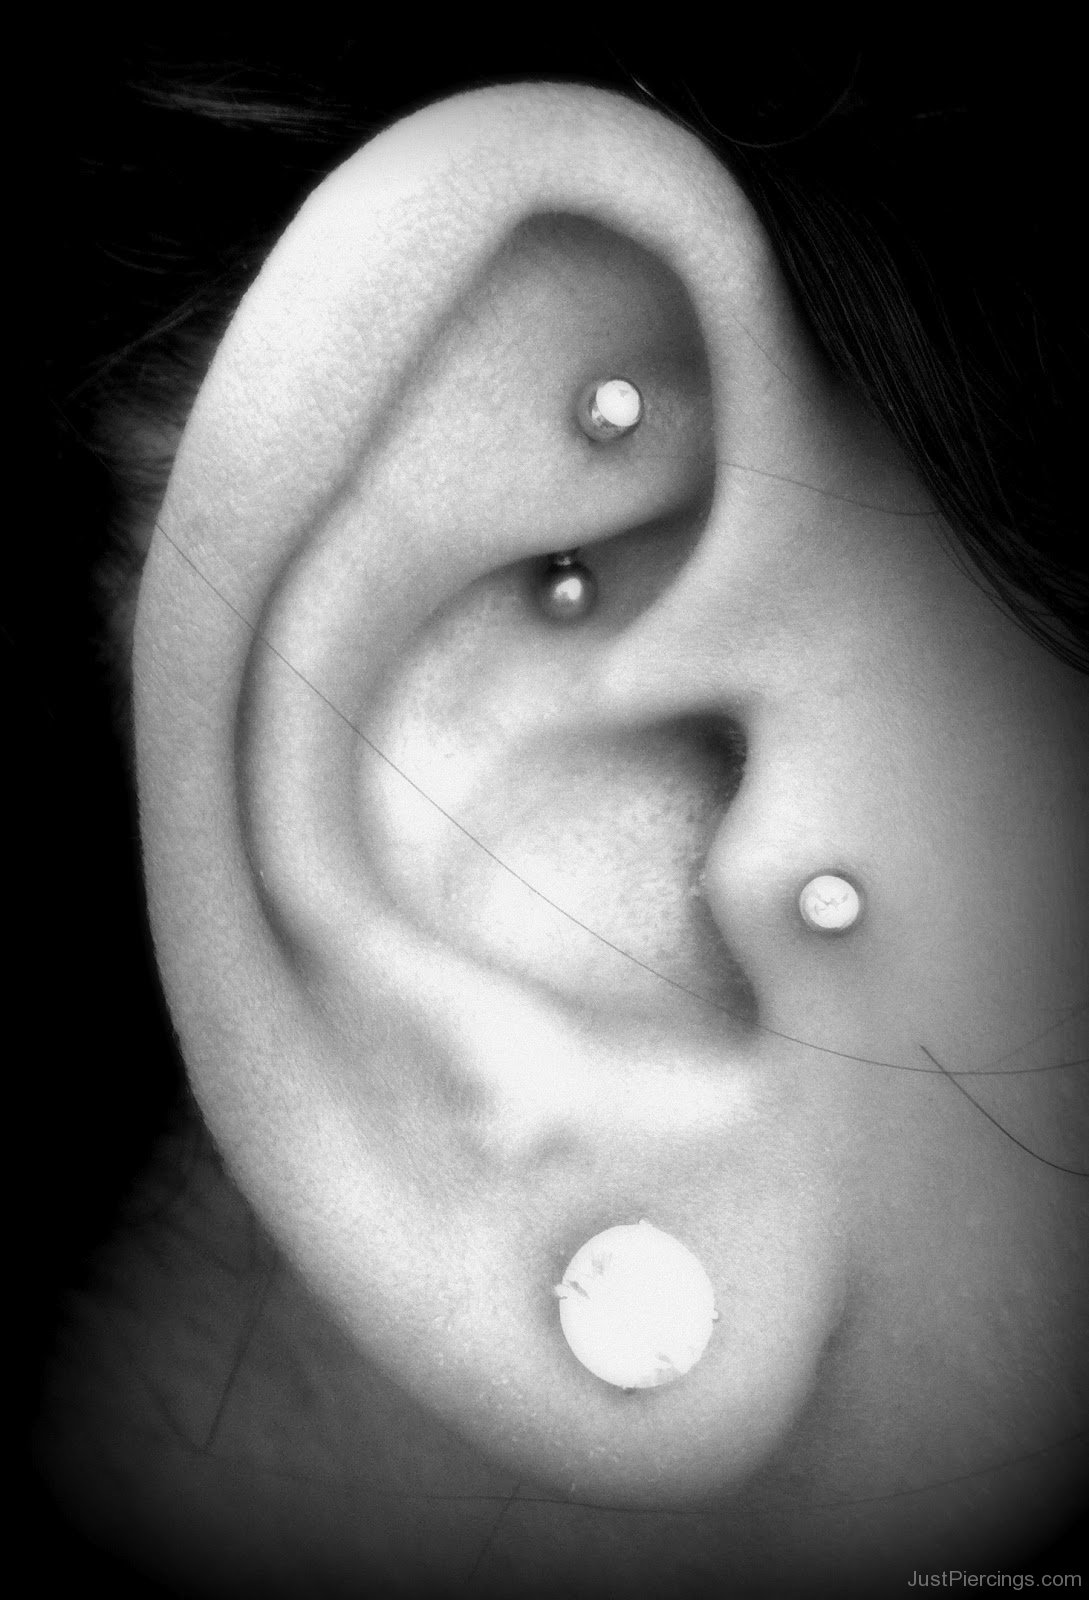 Girl With Ear Lobe, Tragus And Rook Piercing